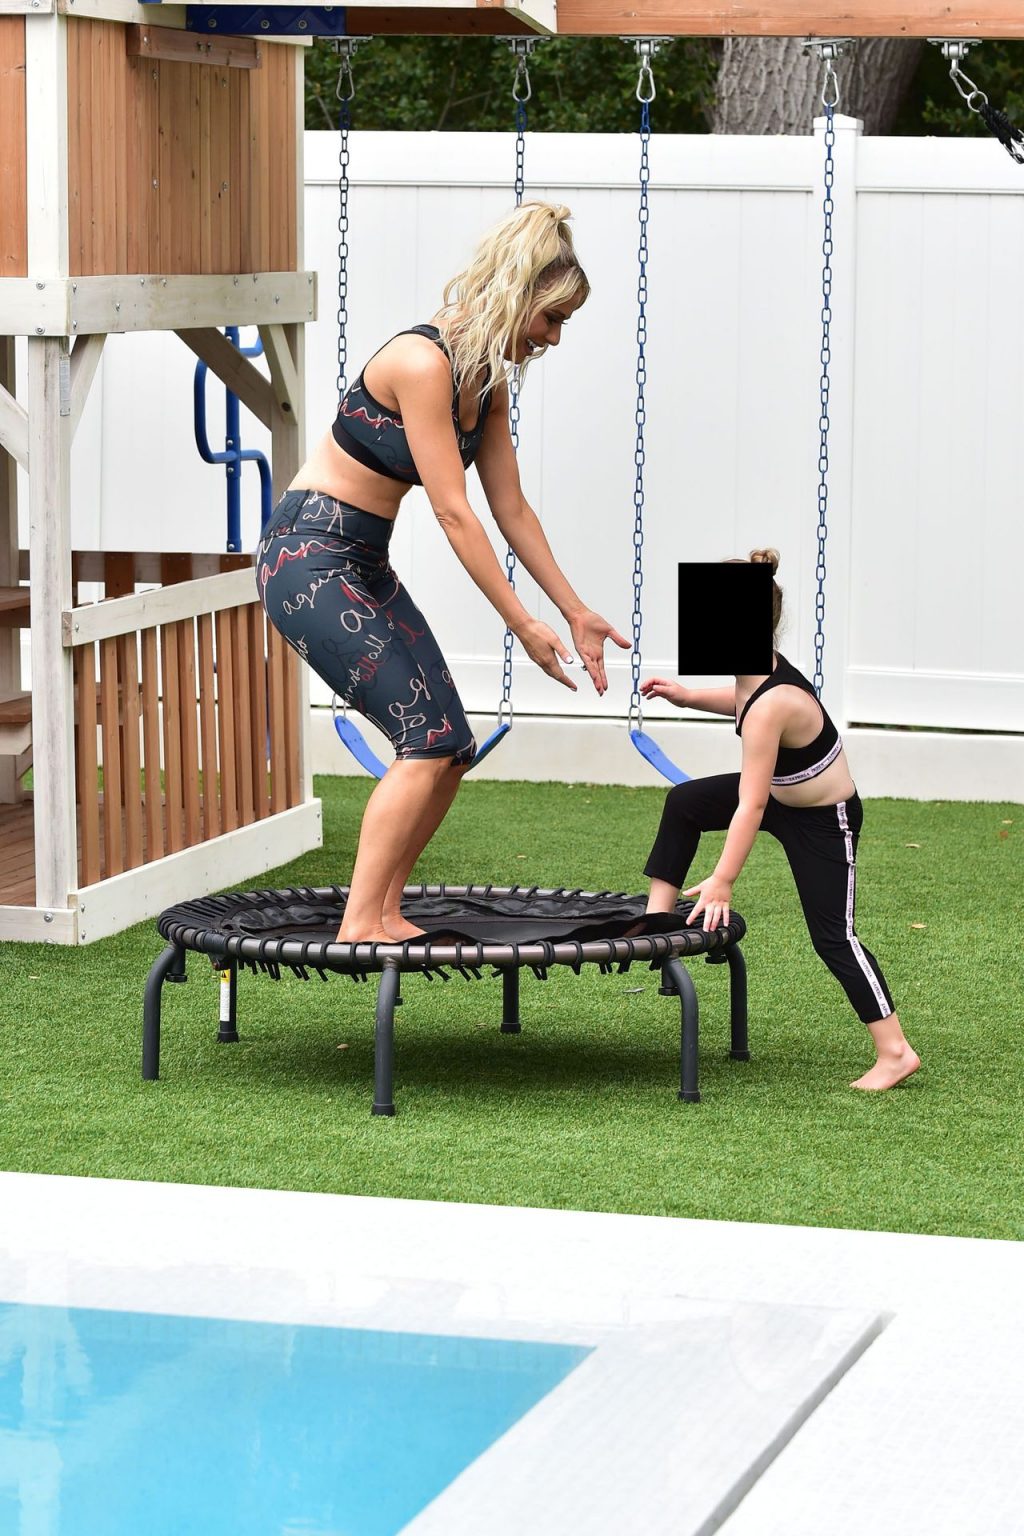 Dorit Kemsley Is Staying Fit With Her Daughter (26 Photos)